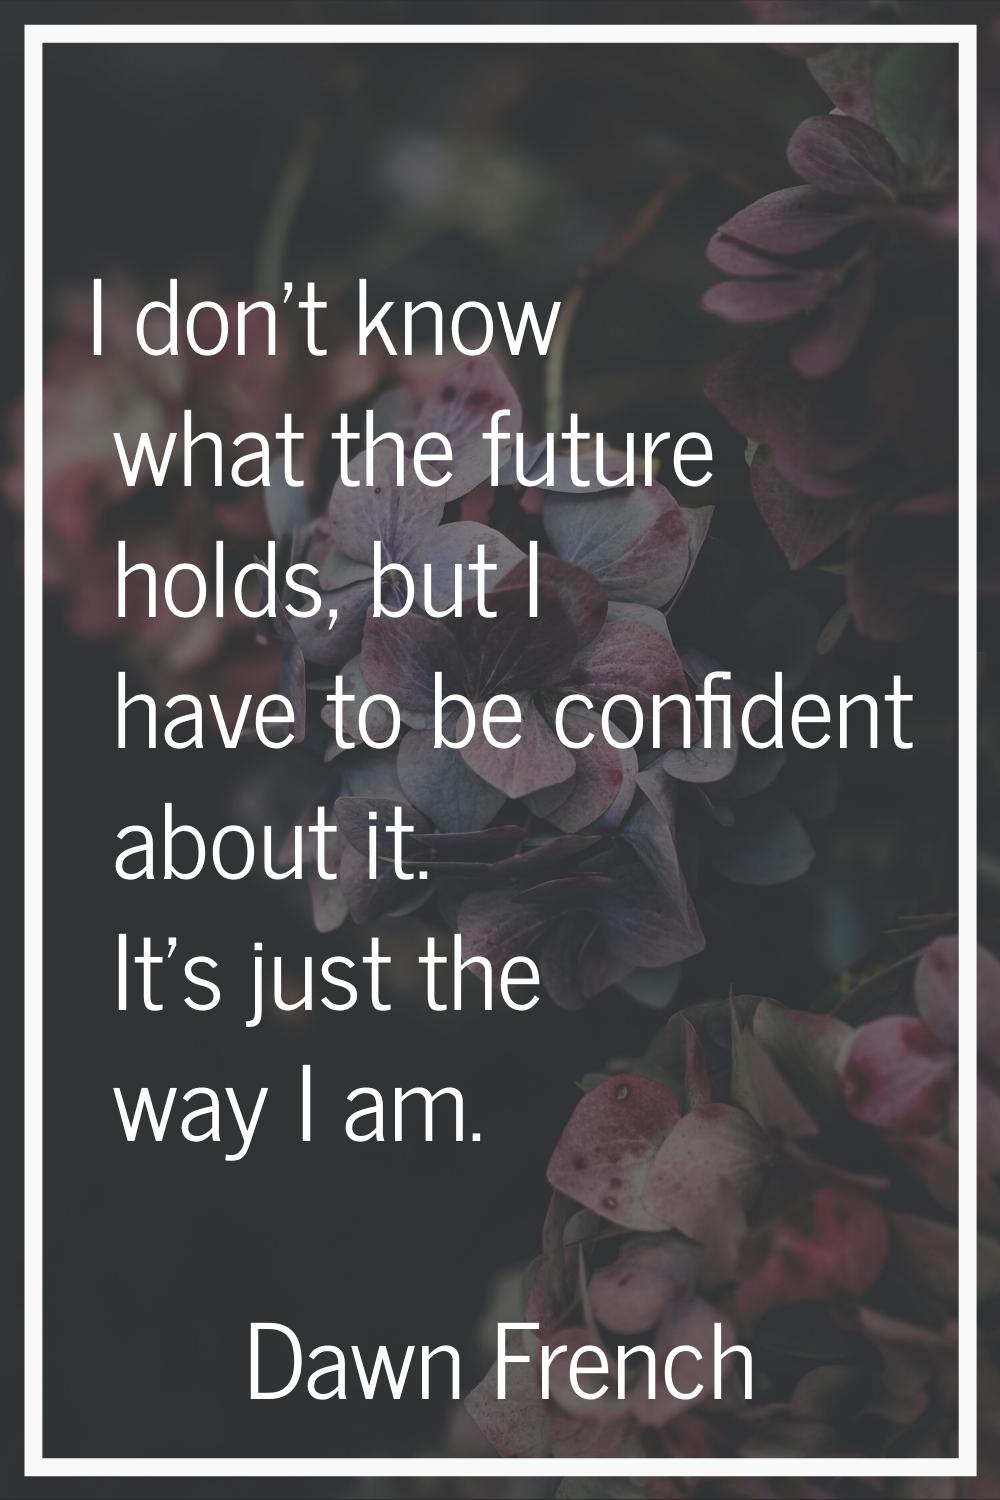 I don't know what the future holds, but I have to be confident about it. It's just the way I am.